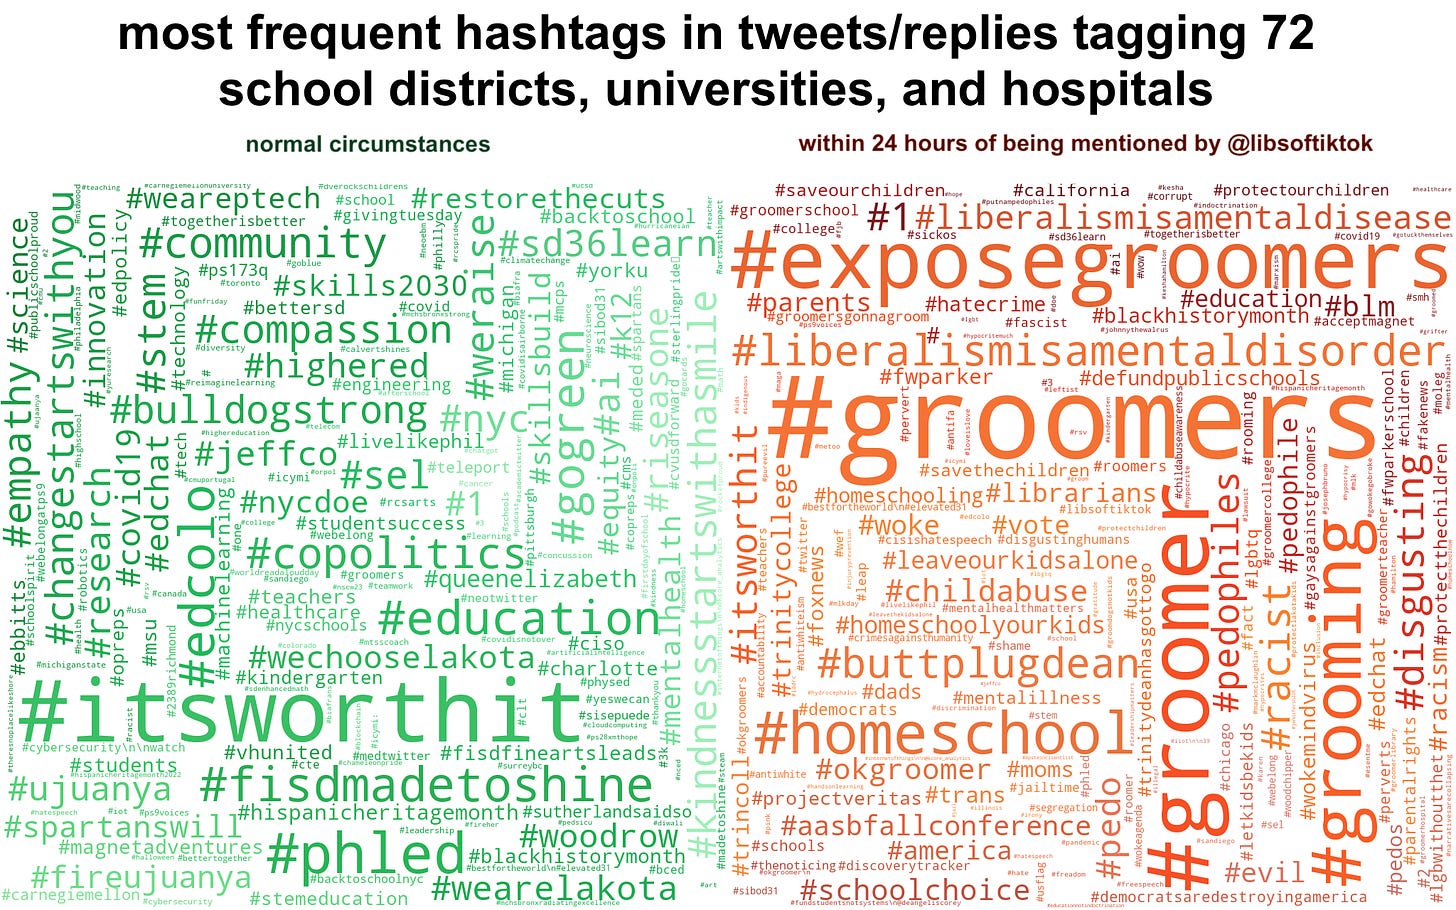 wordclouds of the most common hashtags in tweets/replies mentioning the school district and hospital accounts, both in general and immediately after being tagged by @libsoftiktok